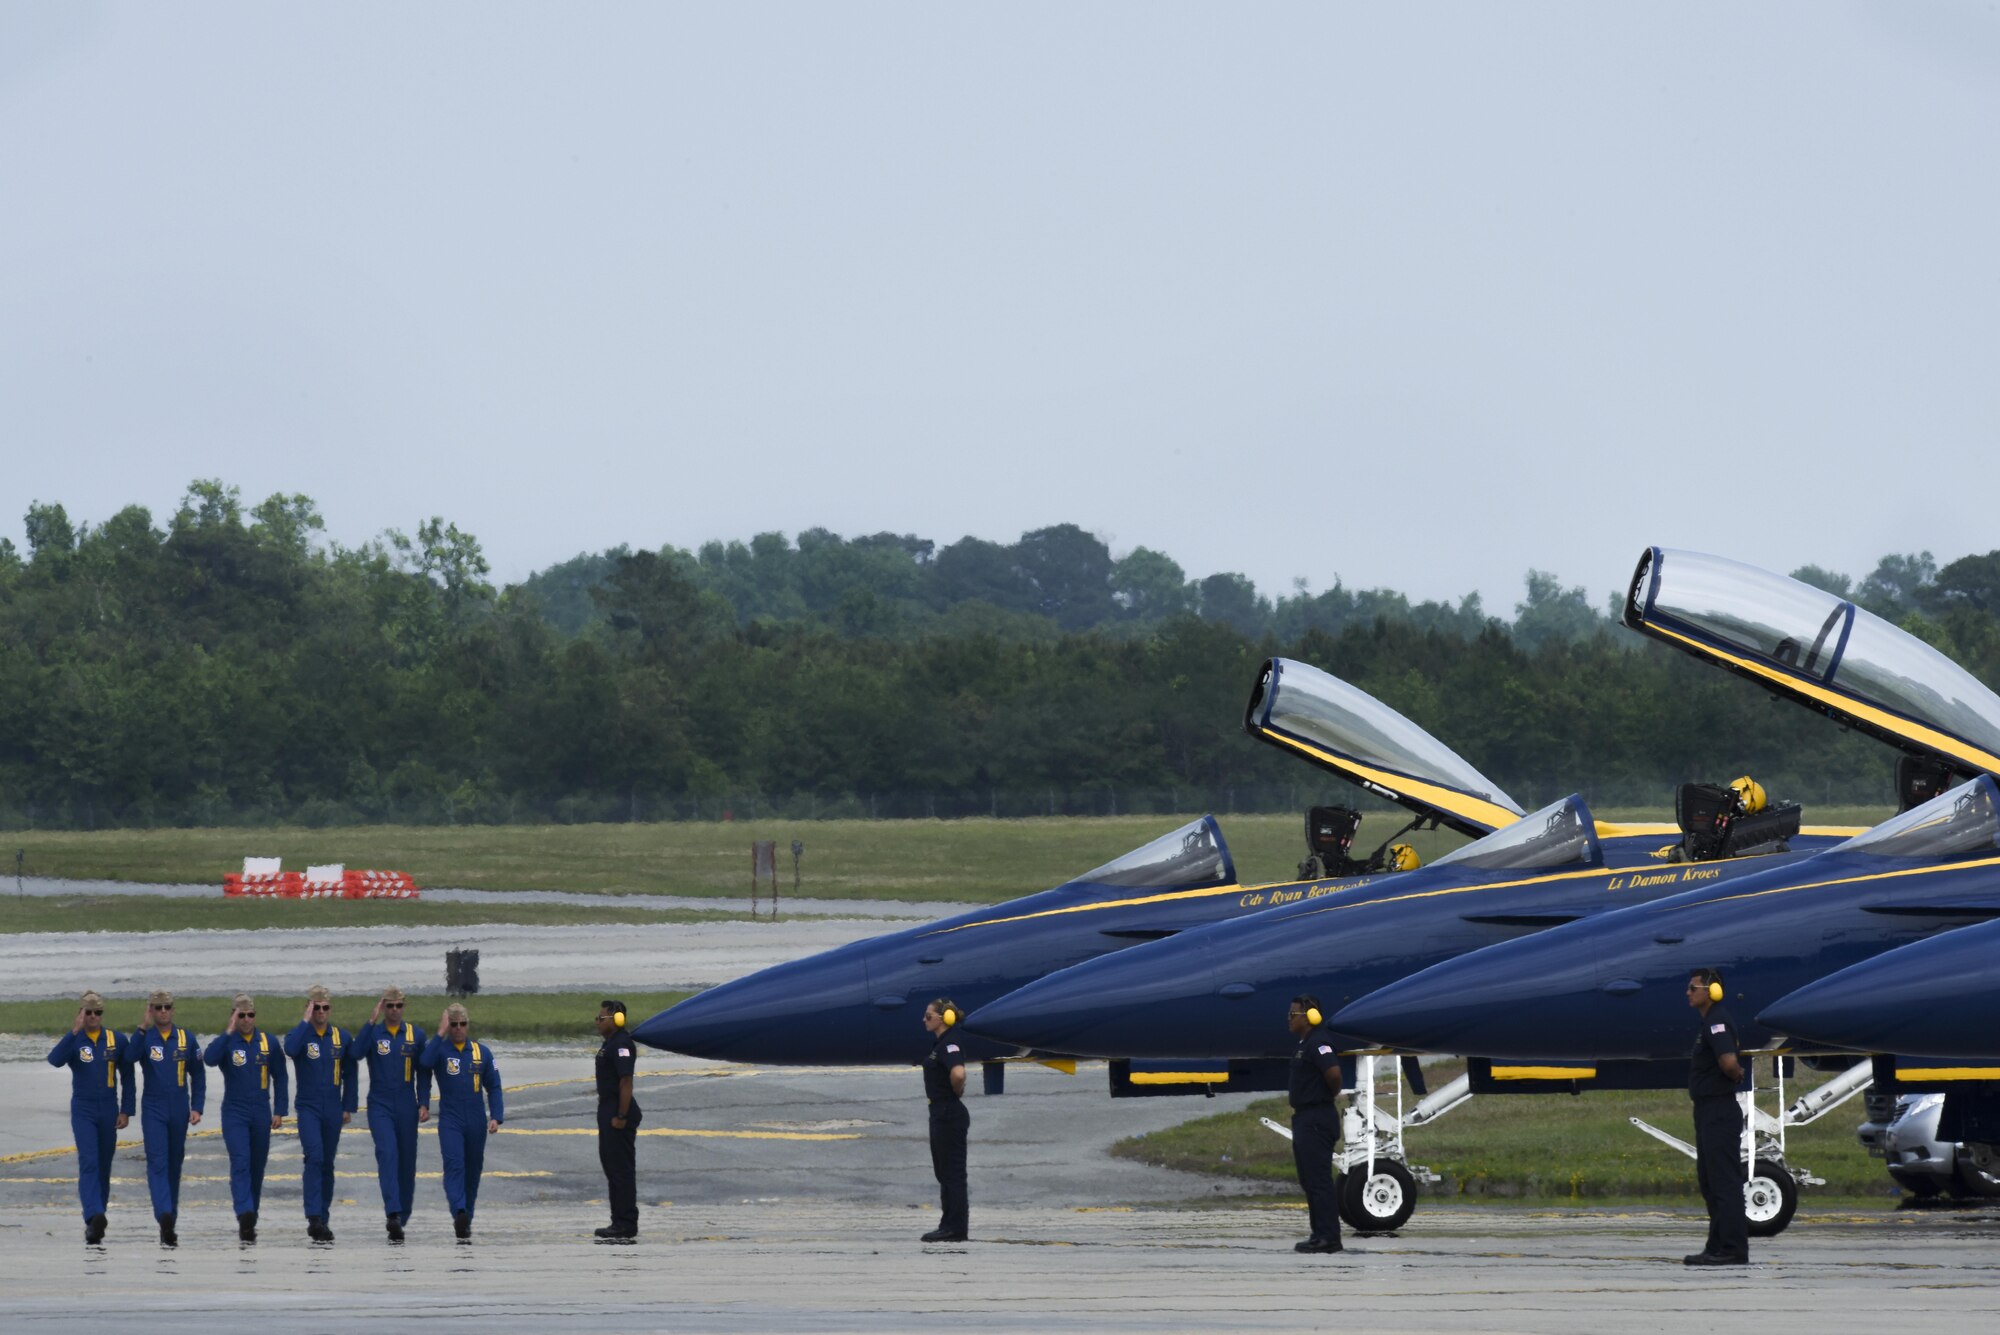 The U.S. Navy Blue Angels salute as they approach their aircraft during the Wings Over Wayne Air Show, May 21, 2017, at Seymour Johnson Air Force Base, North Carolina. The Blue Angels team consists of 17 officers and more than 100 enlisted Sailors and Marines who serve support and maintenance roles. (U.S. Air Force photo by Staff Sgt. Brittain Crolley)